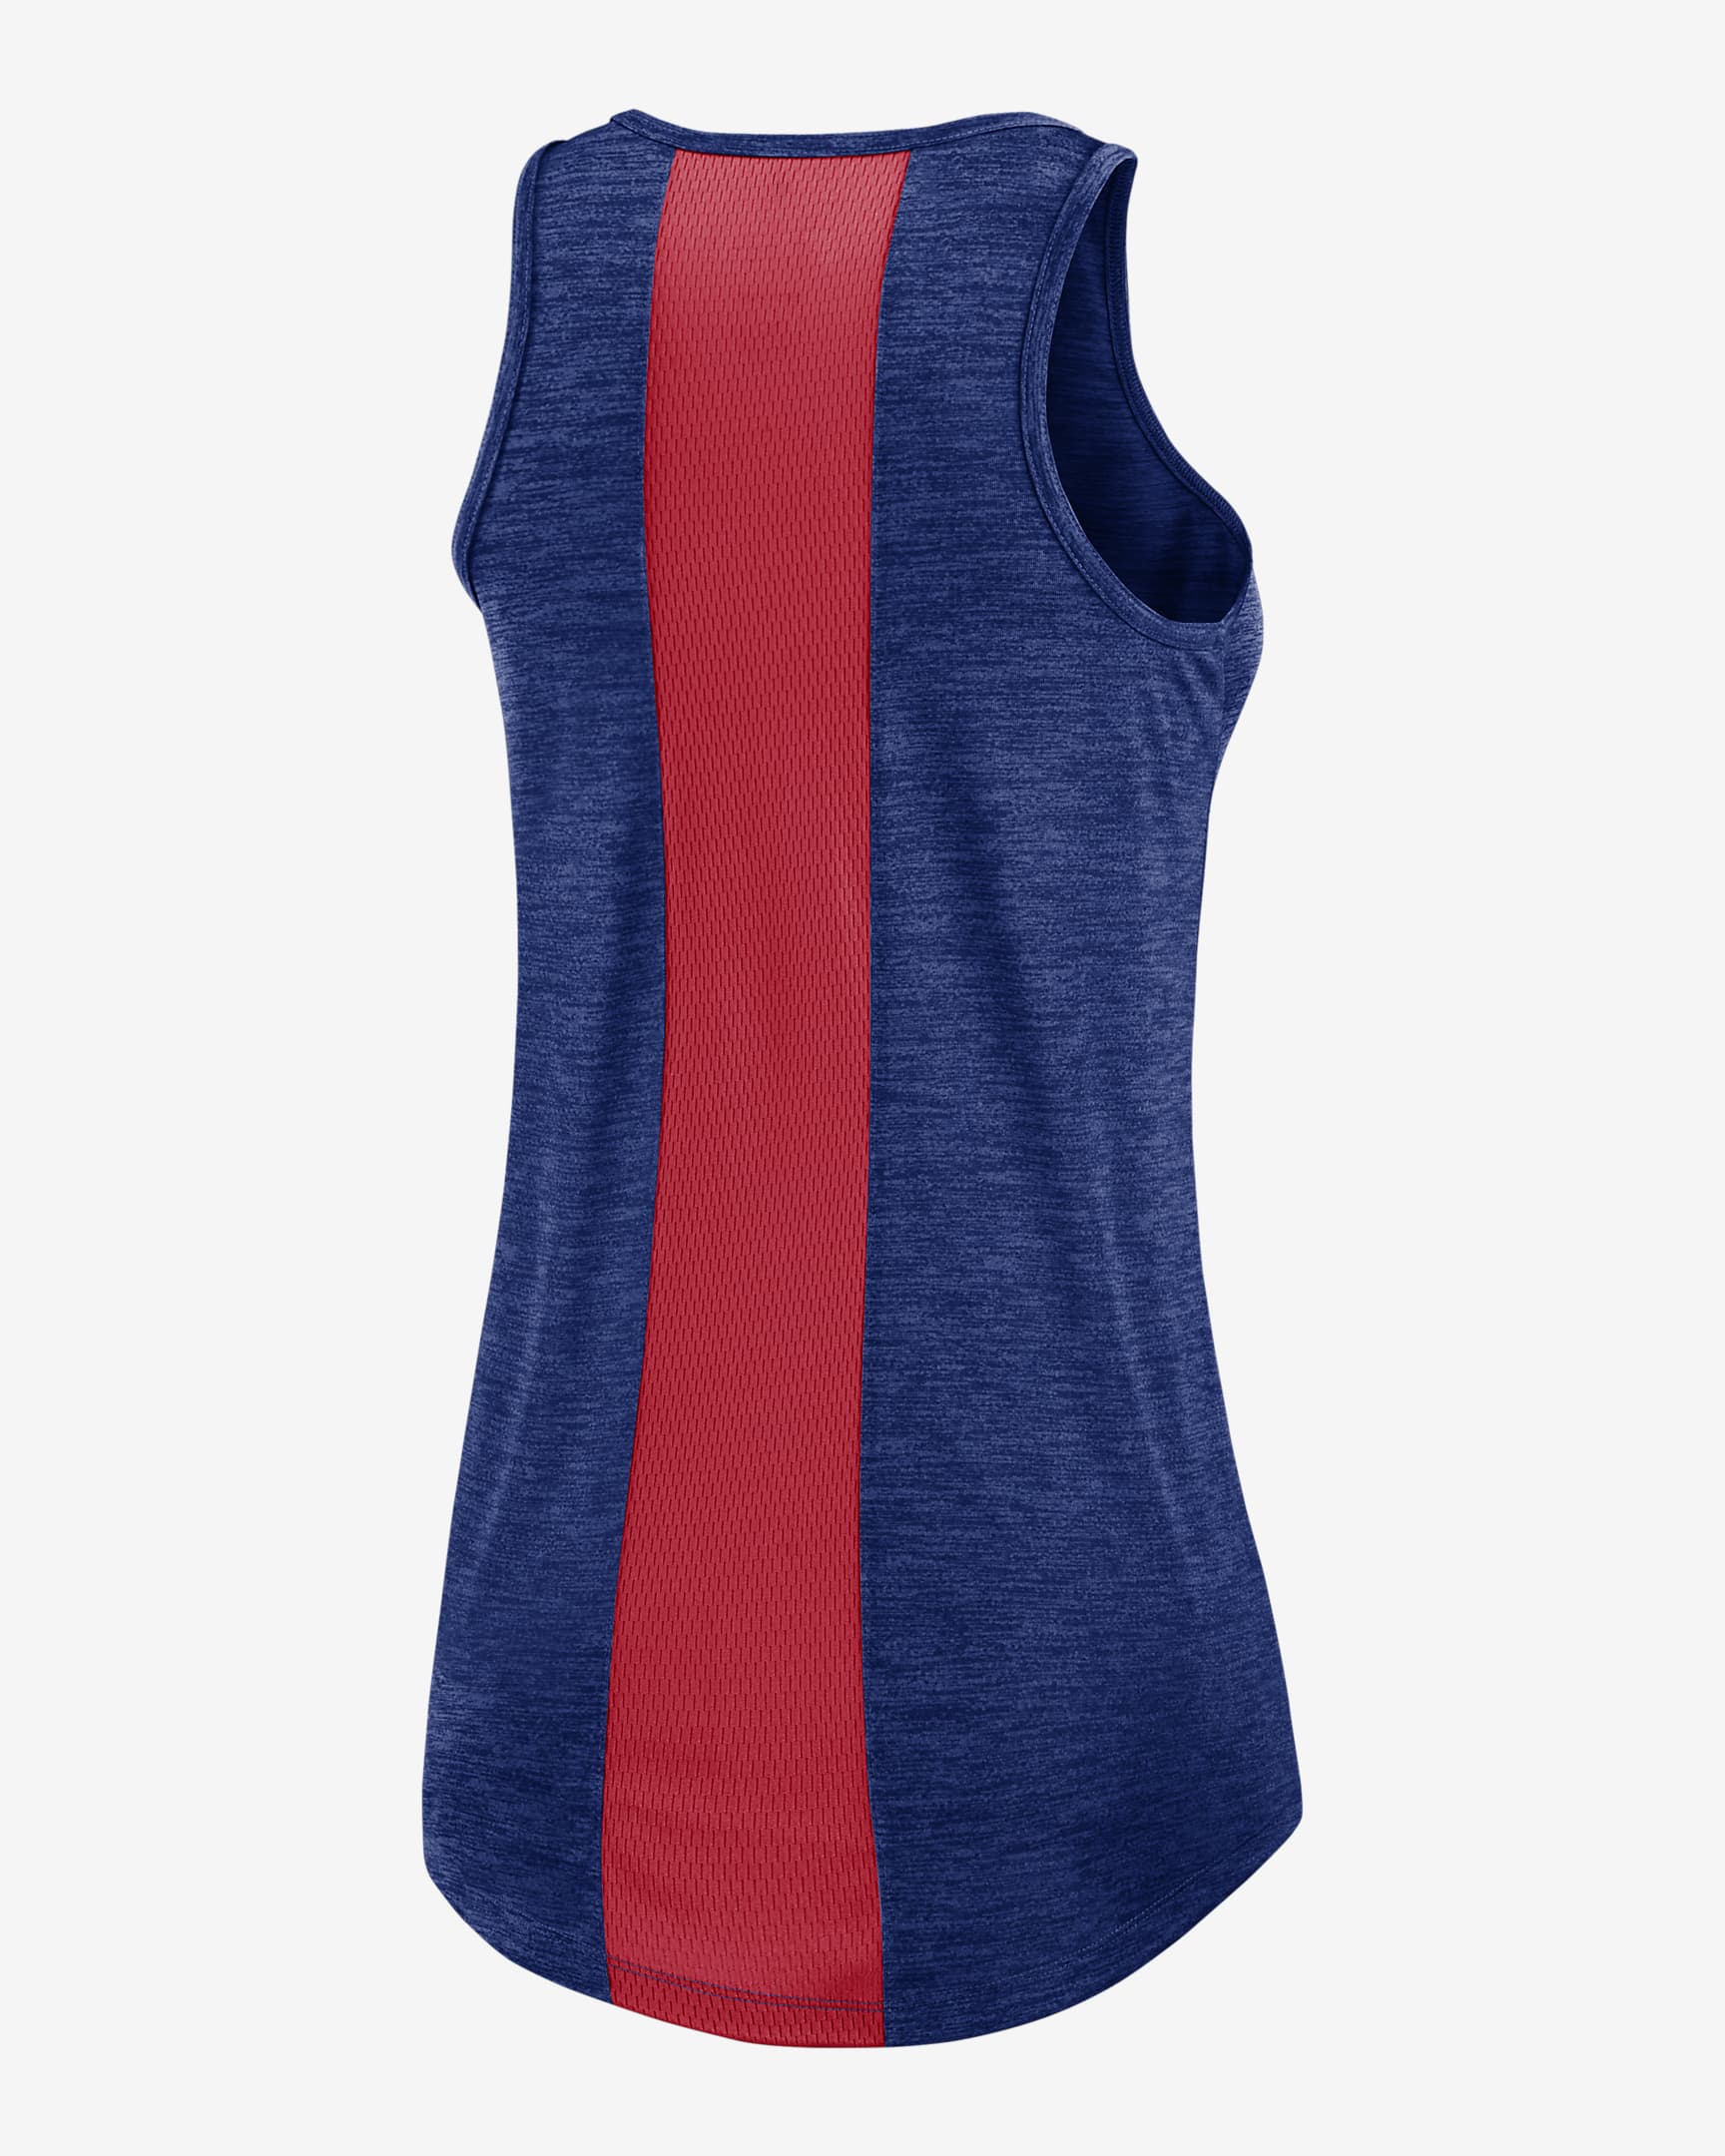 Nike Dri-FIT Right Mix (MLB Chicago Cubs) Women's High-Neck Tank Top ...